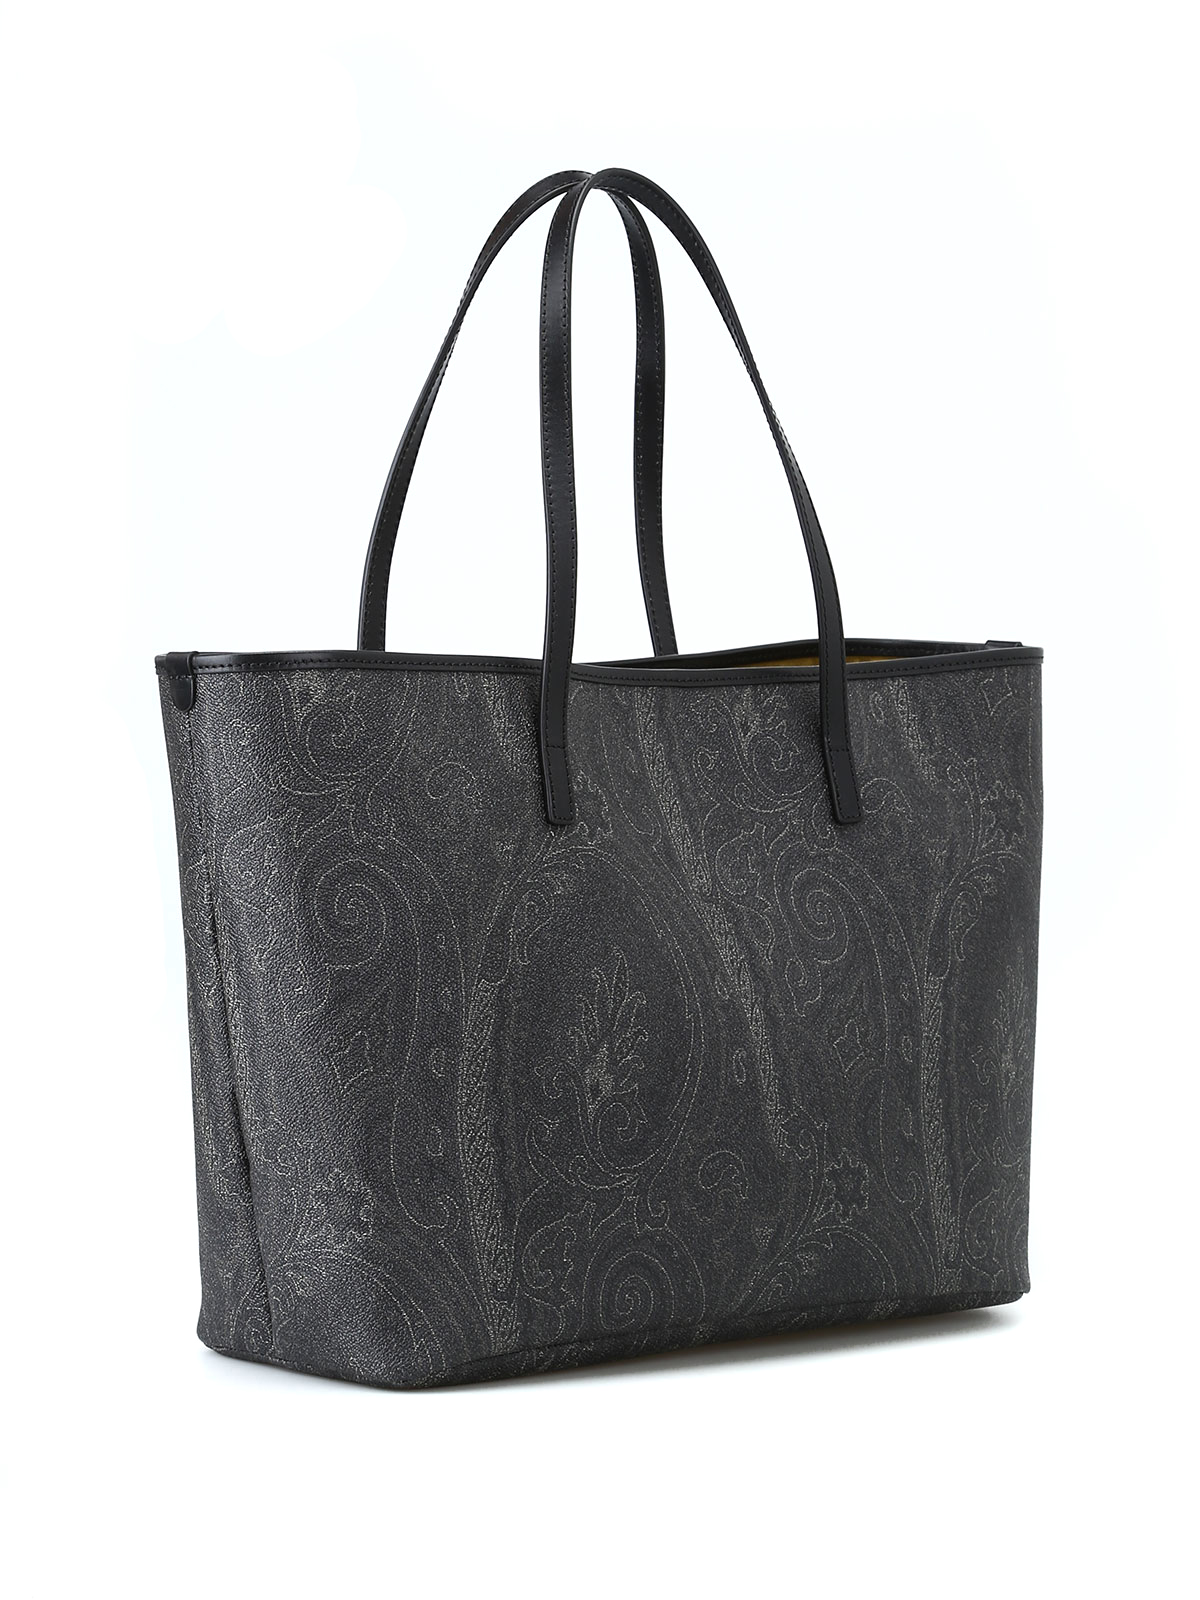 Totes bags Etro - Paisley east west black tote - 0B37480101 | iKRIX.com